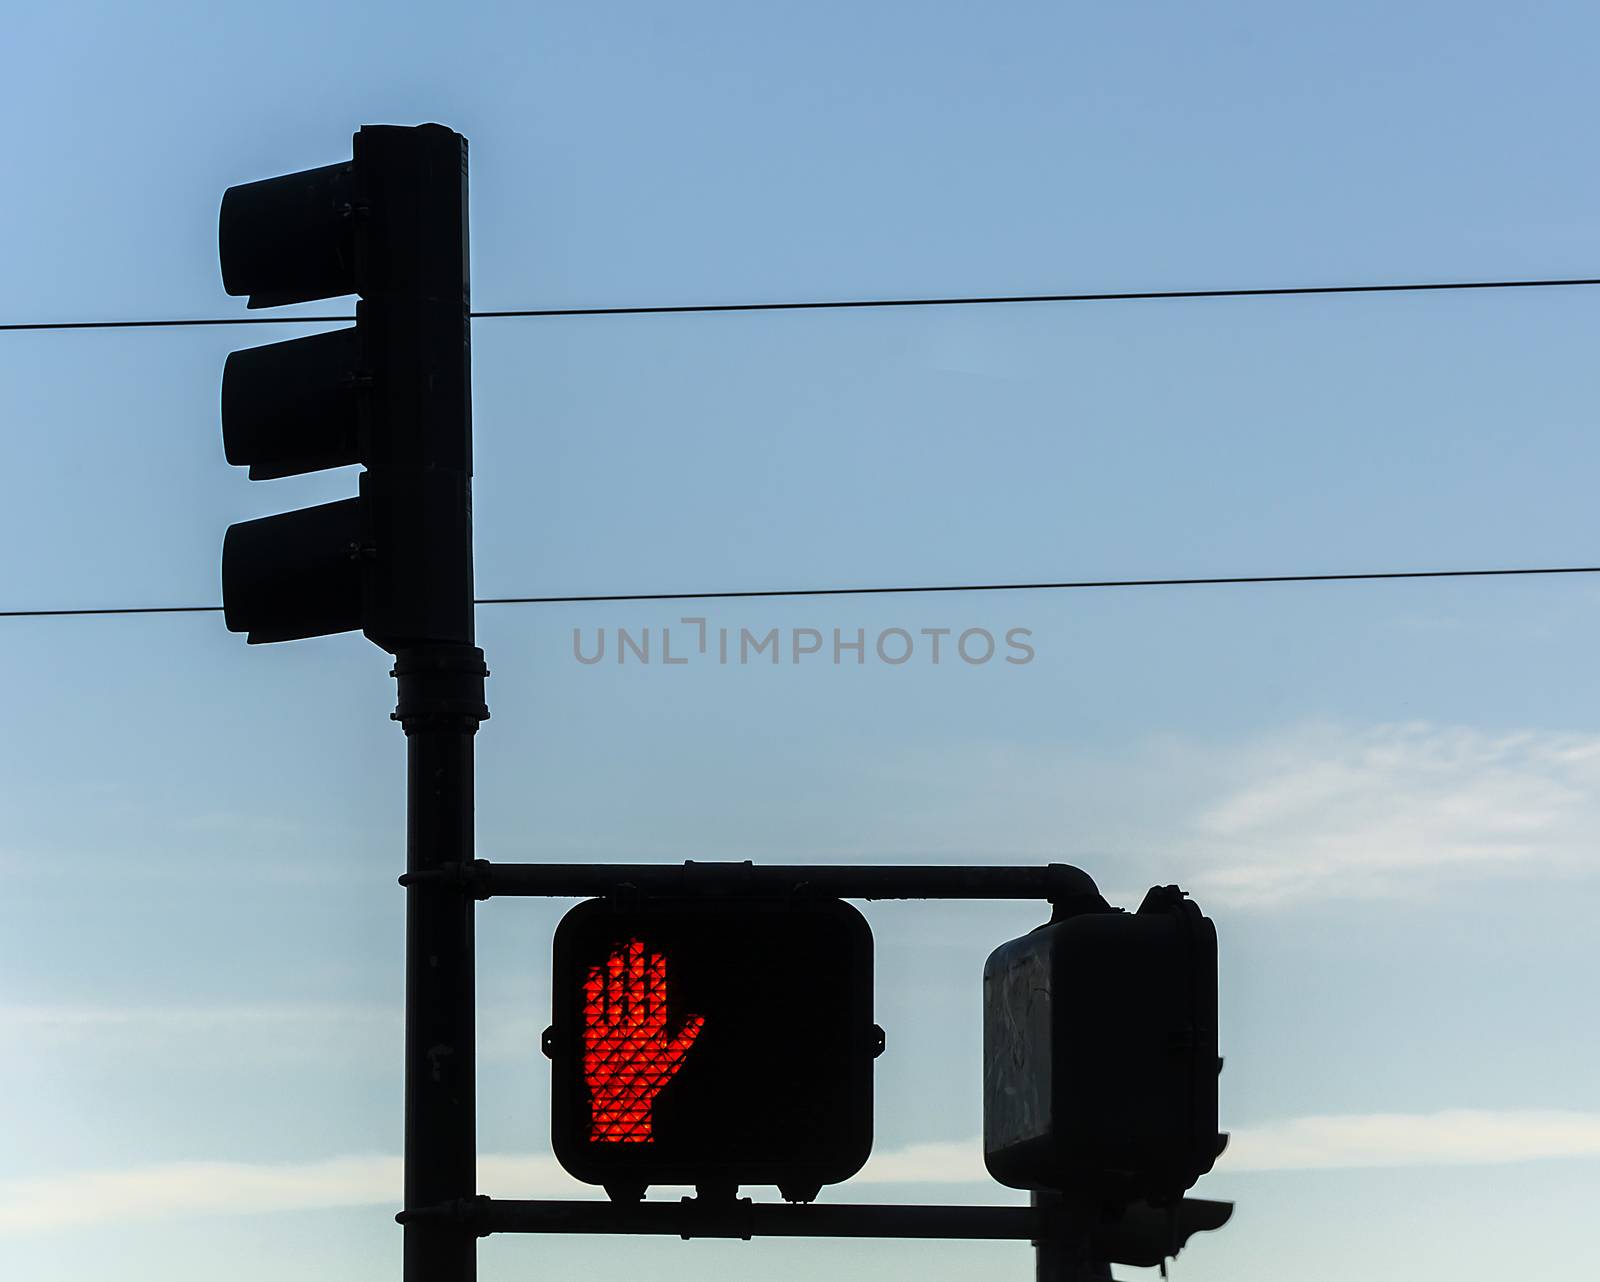 traffic lights with red stop signal for pedestrian